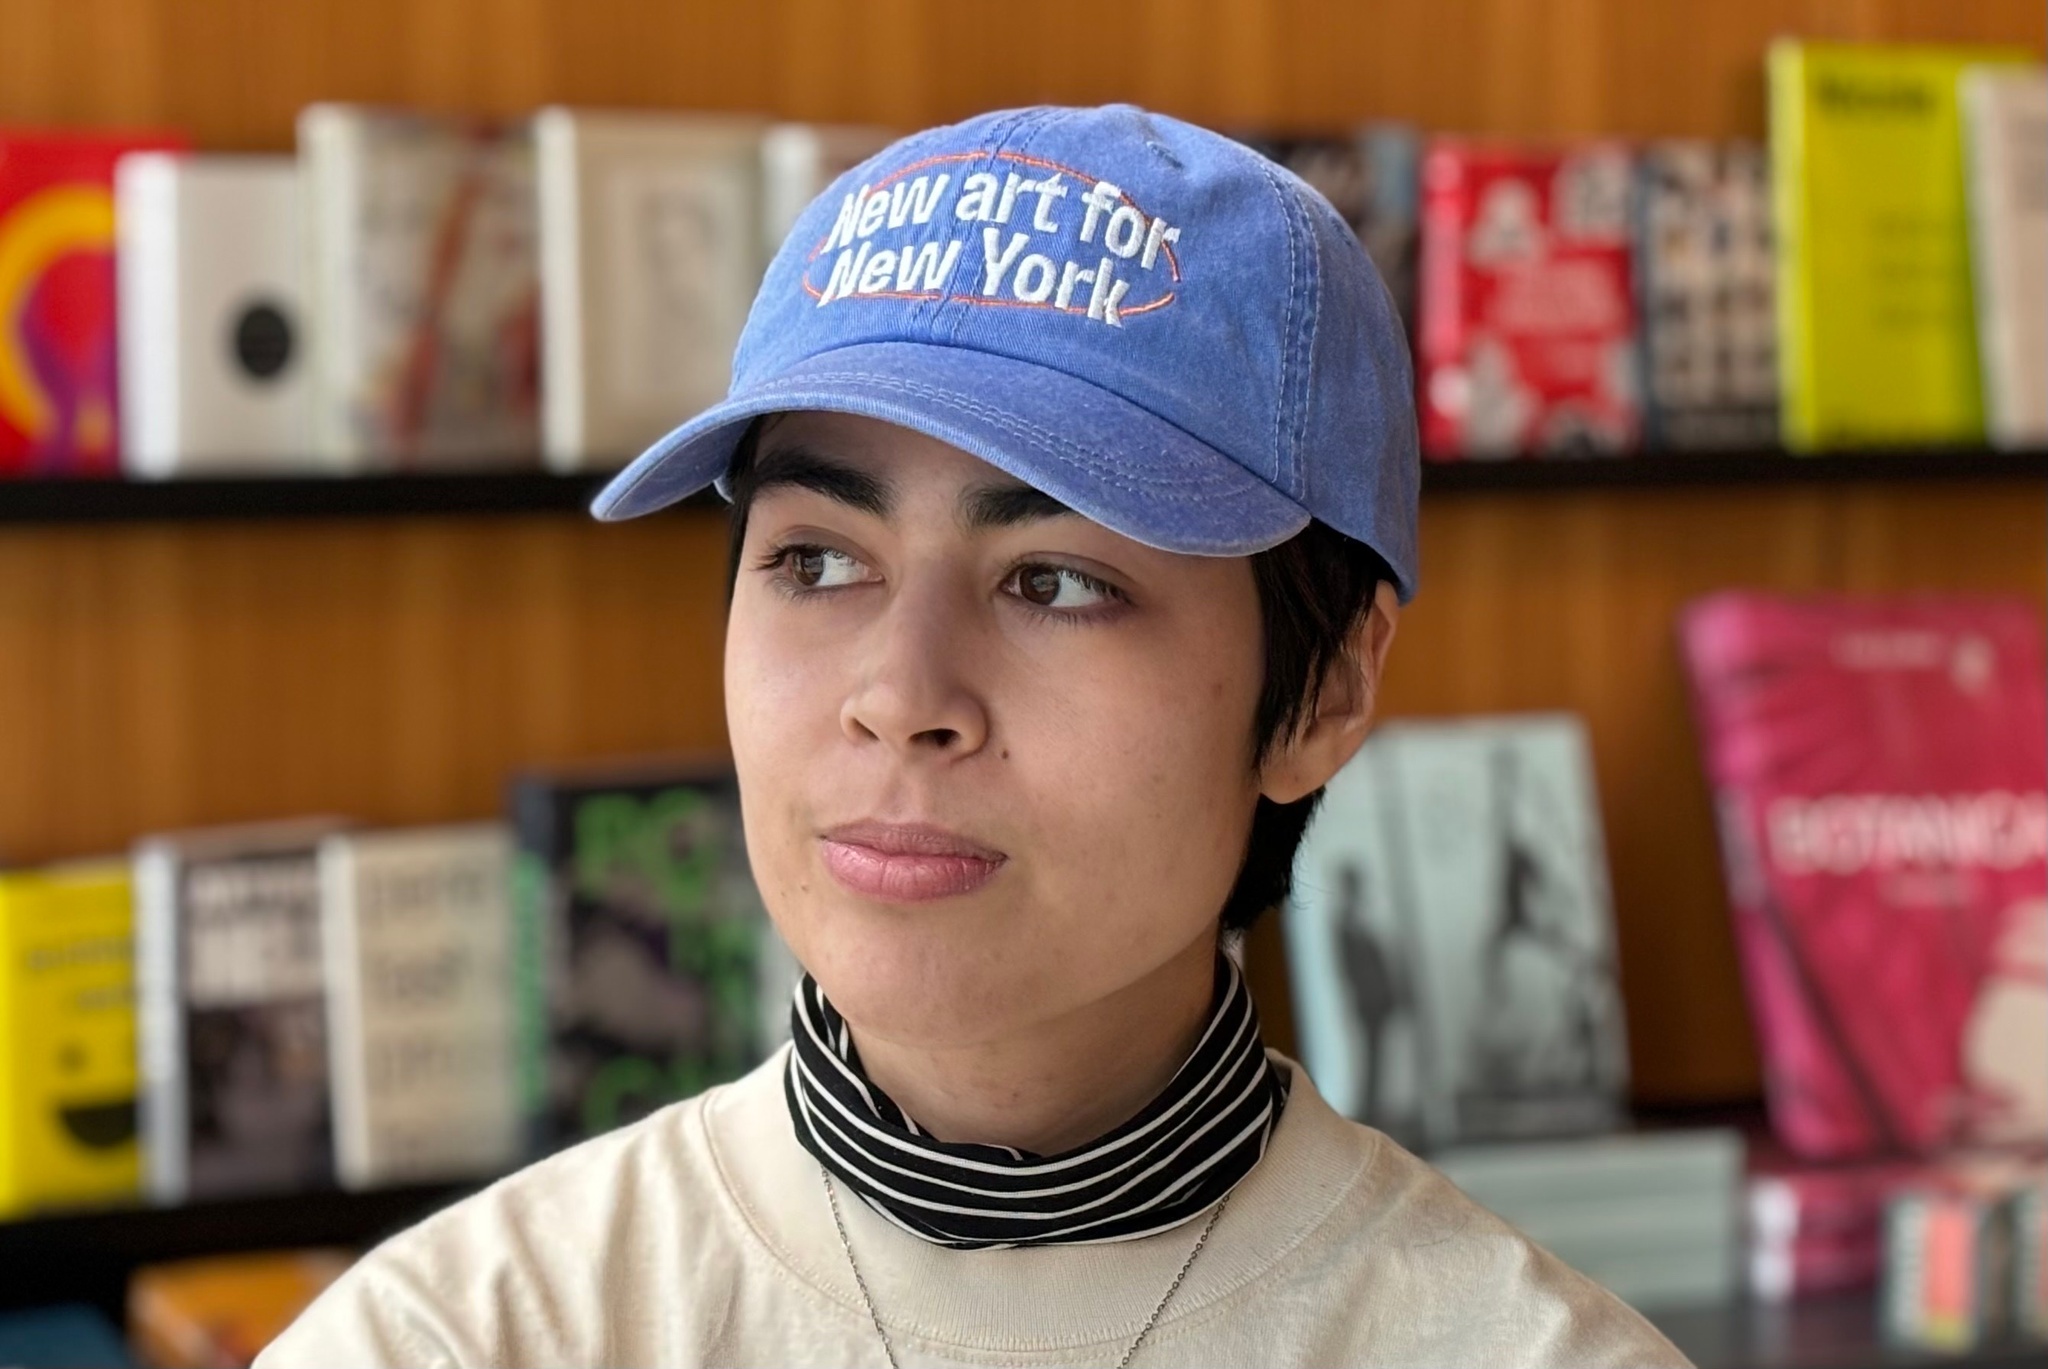 A model wears an Open Call baseball cap. The cap is a light blue, like a periwinkle denim. Across the front of the cap is embroidered in white letters: New art for New York. Behind the model are rows of books softly out of focus and facing outward along a wooden wall.